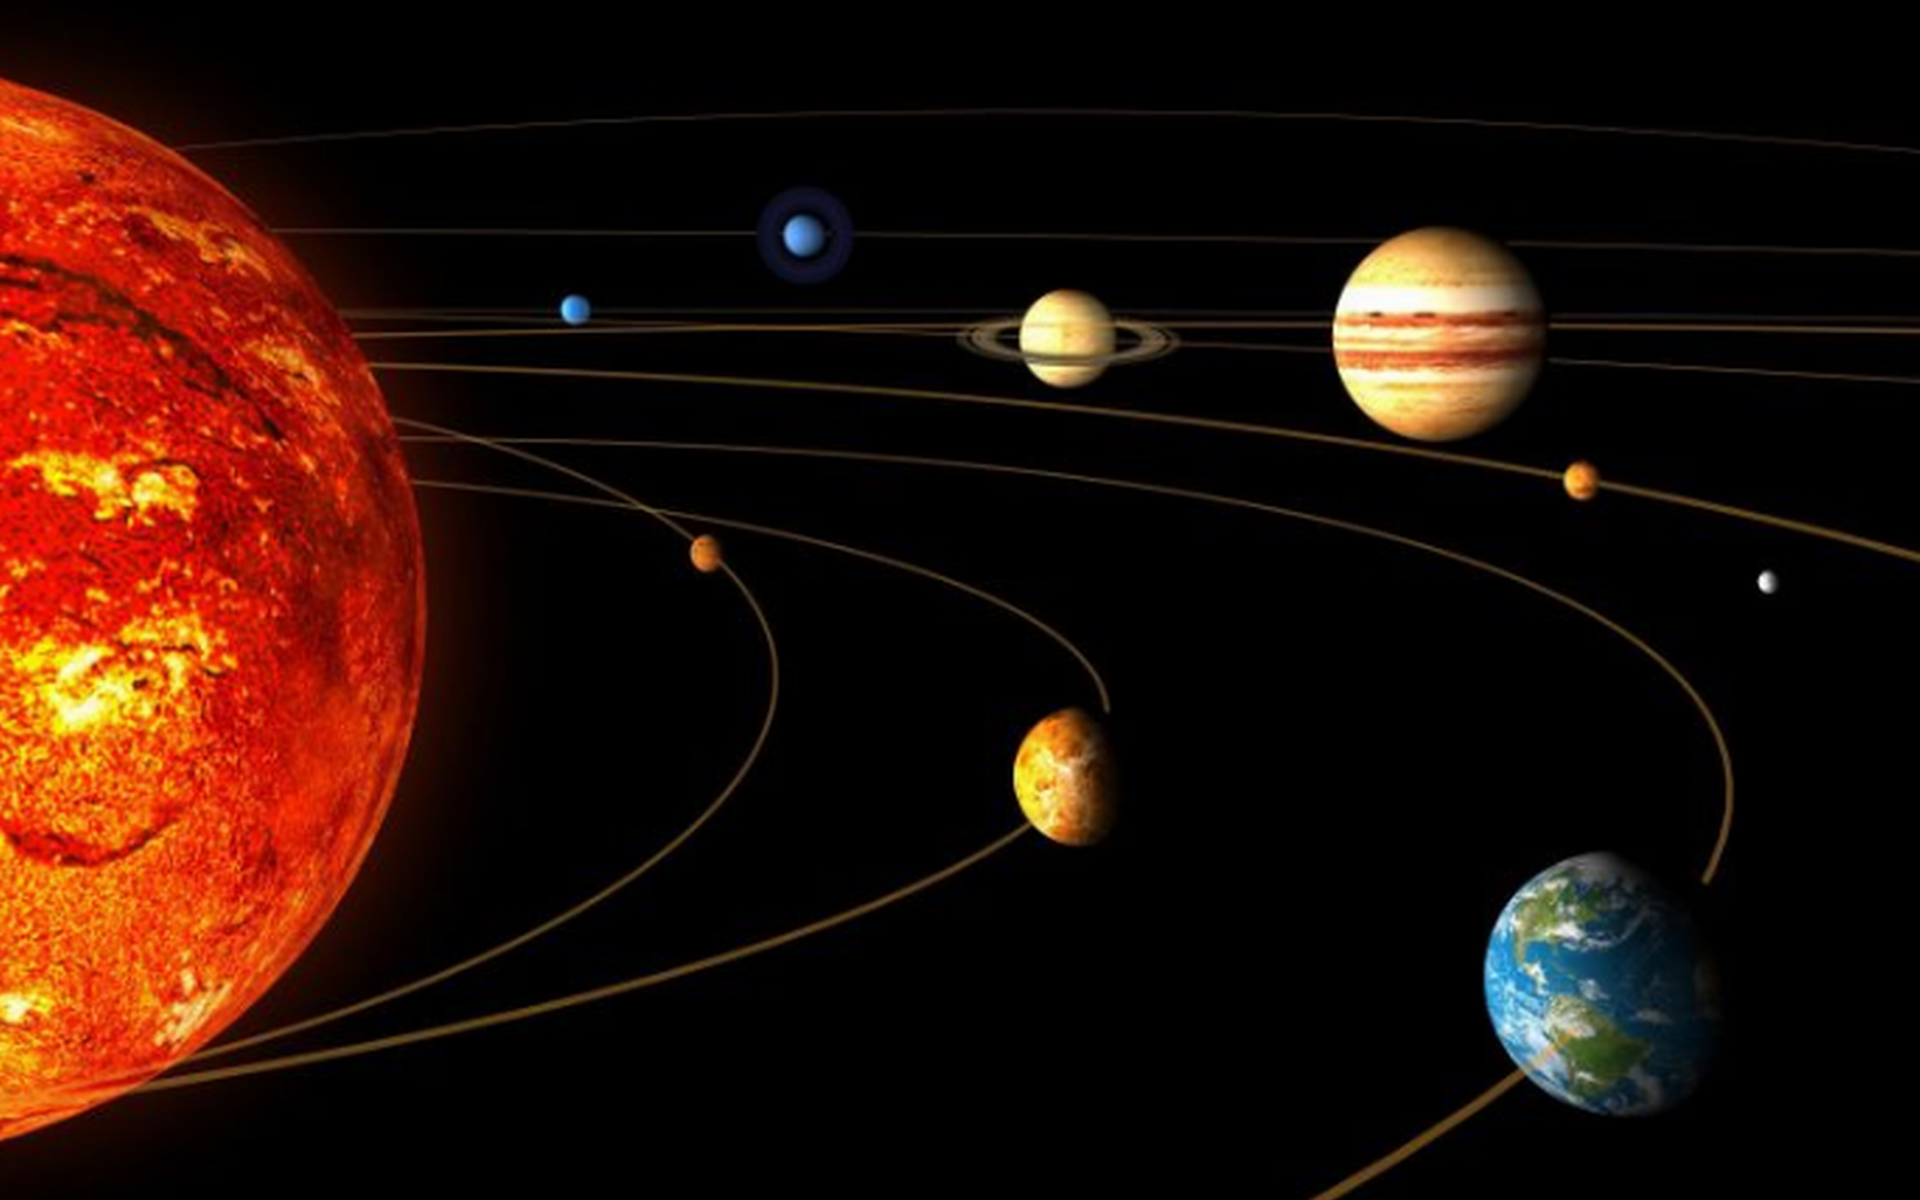  The Solar System HD Wallpapers Space Nature Wallpaper Full Free Download